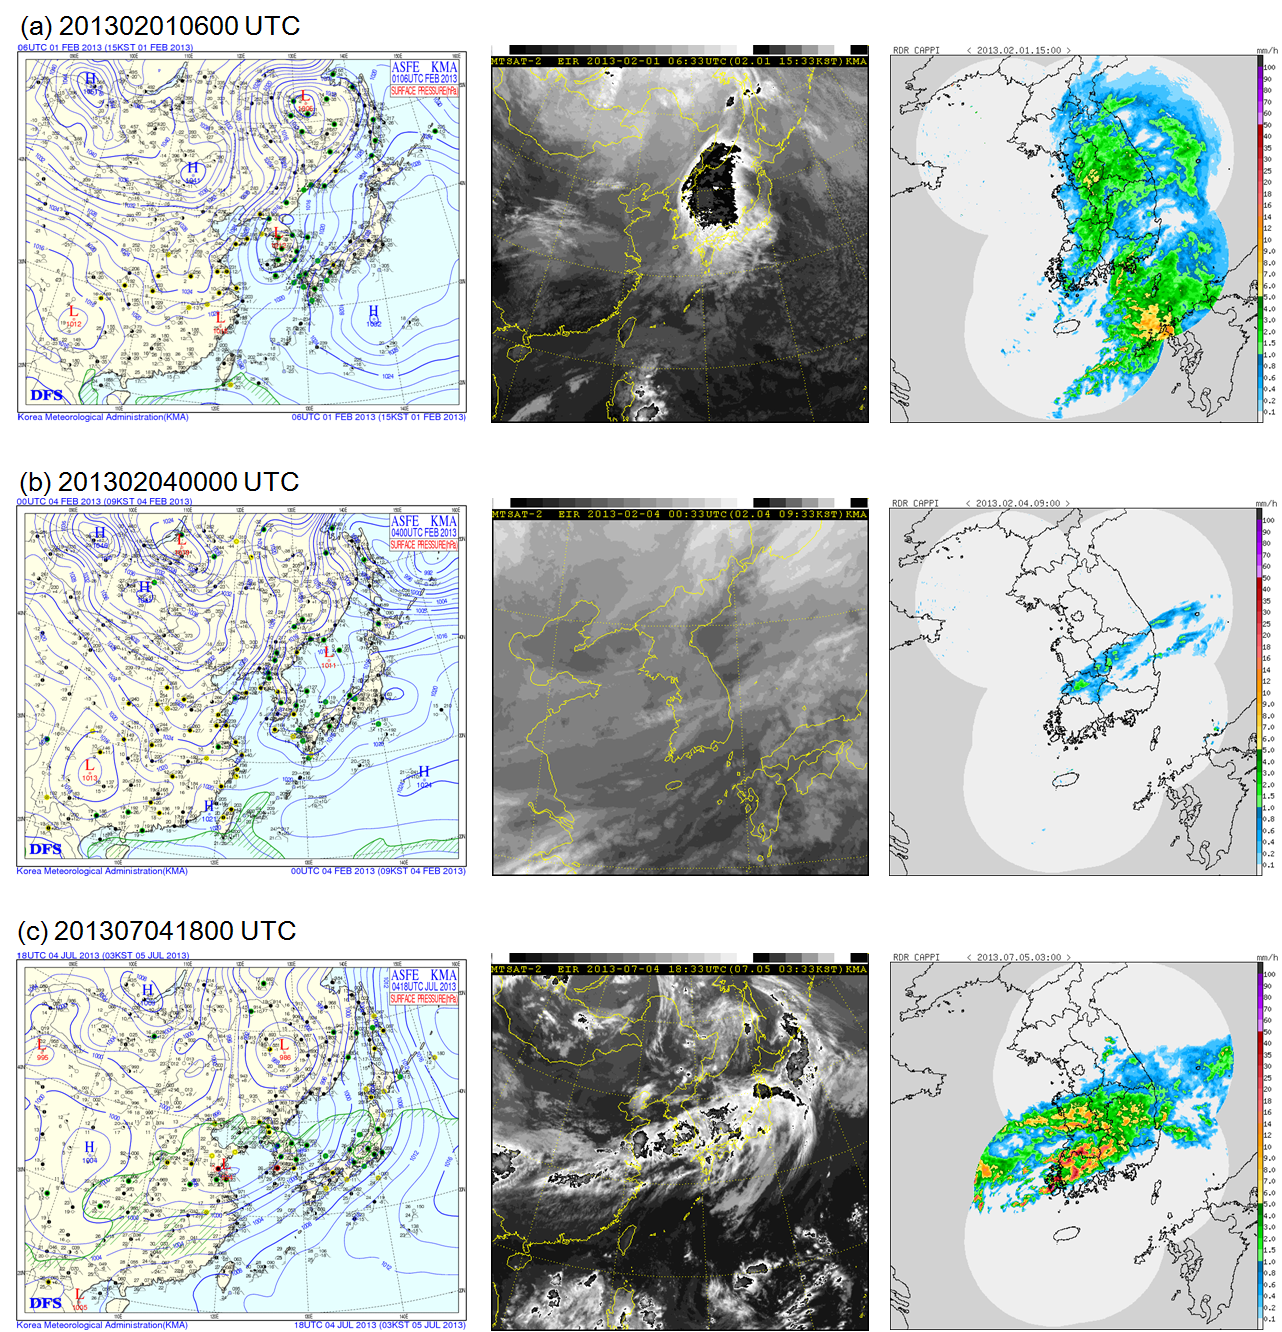 Fig 3.3.1.4. The surface weather charts(left), MTSAT enhanced IR image(middle), and radar image(right) at 0600 UTC 1 February 2013(top). (b) is same as (a), except for 0000 UTC 4 February 2013(middle). (c) is same as (a), except for 1800 UTC 4 July 2013